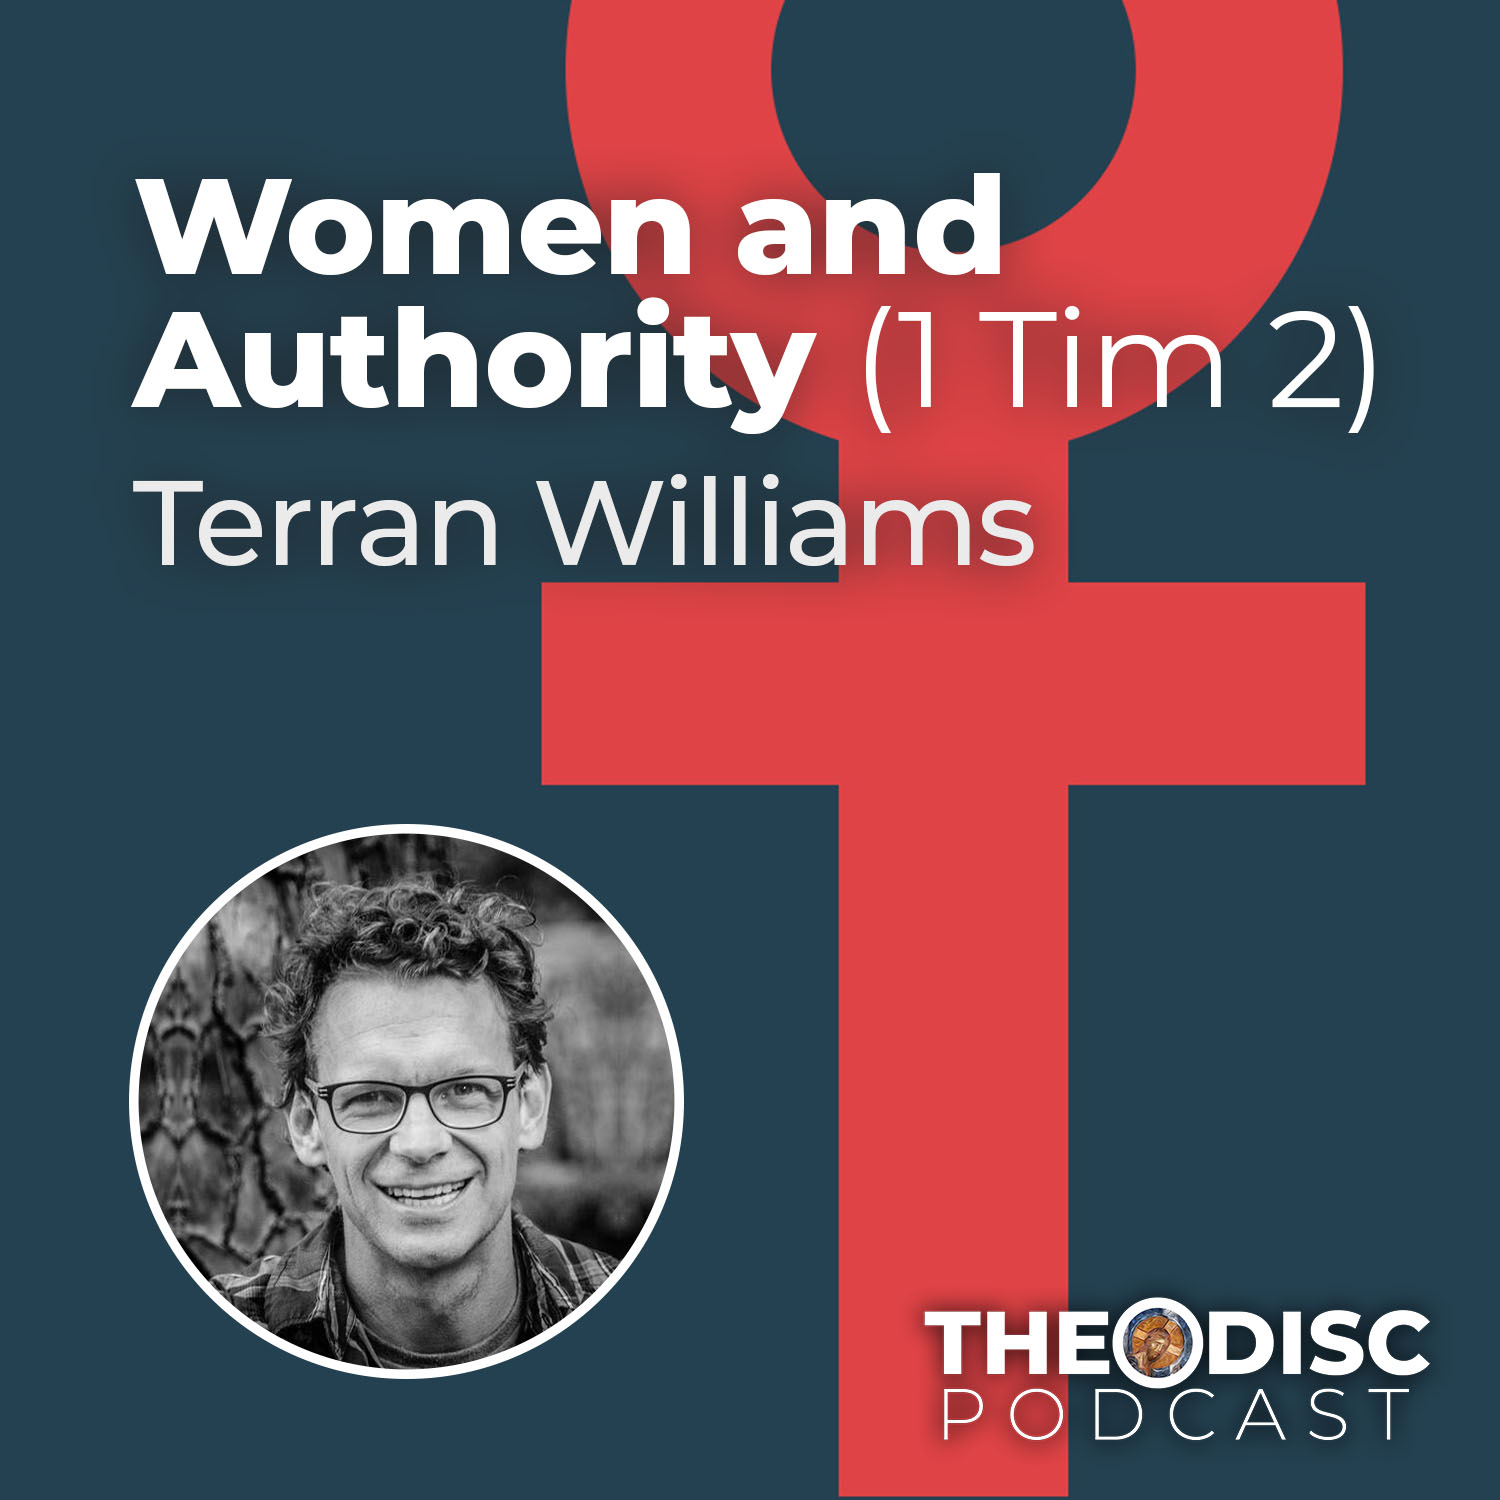 Terran Williams - Women and Authority in 1 Timothy 2